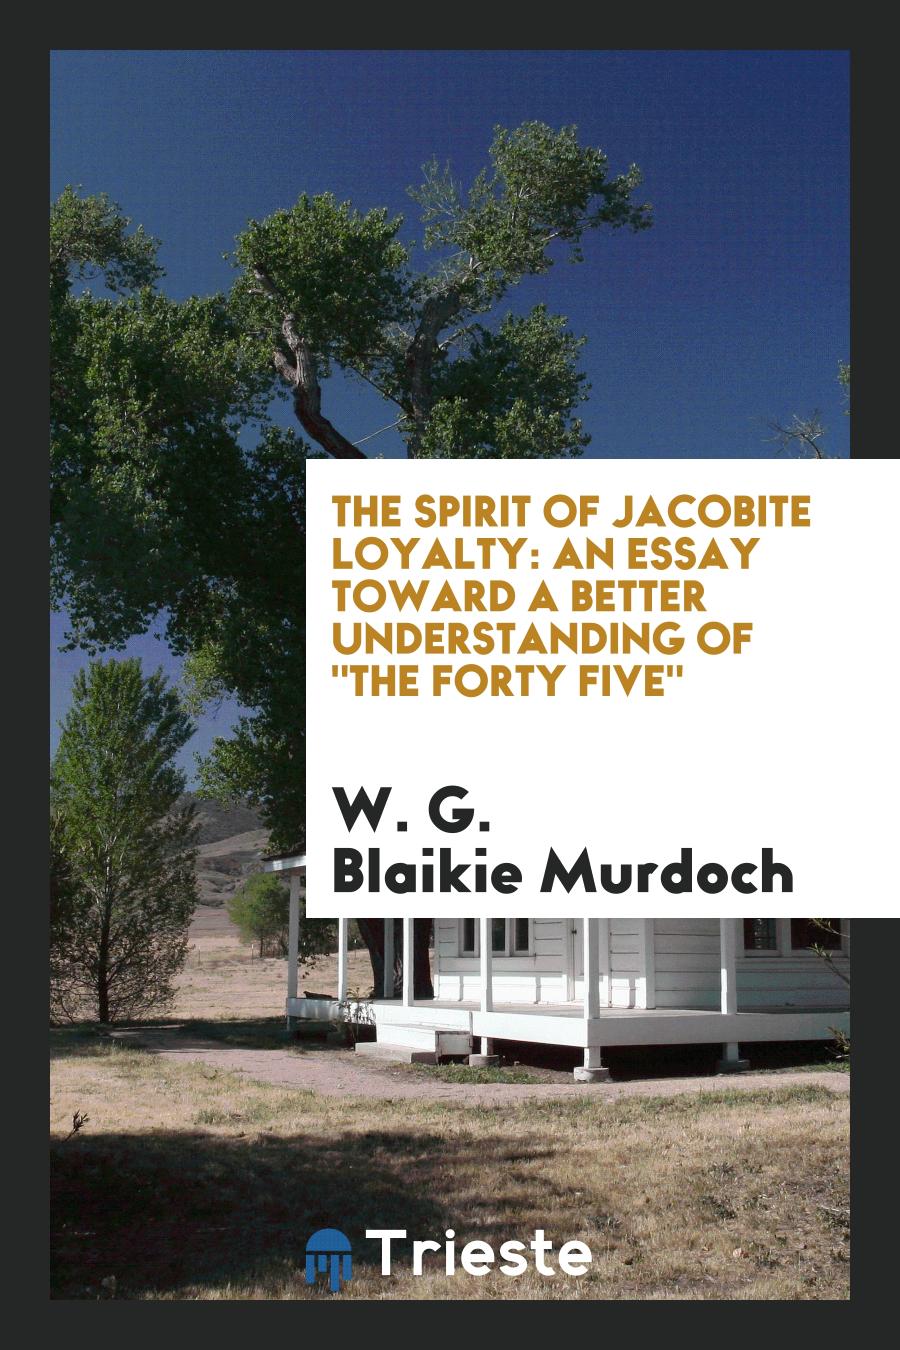 The Spirit of Jacobite Loyalty: An Essay toward a Better Understanding Of "The Forty Five"